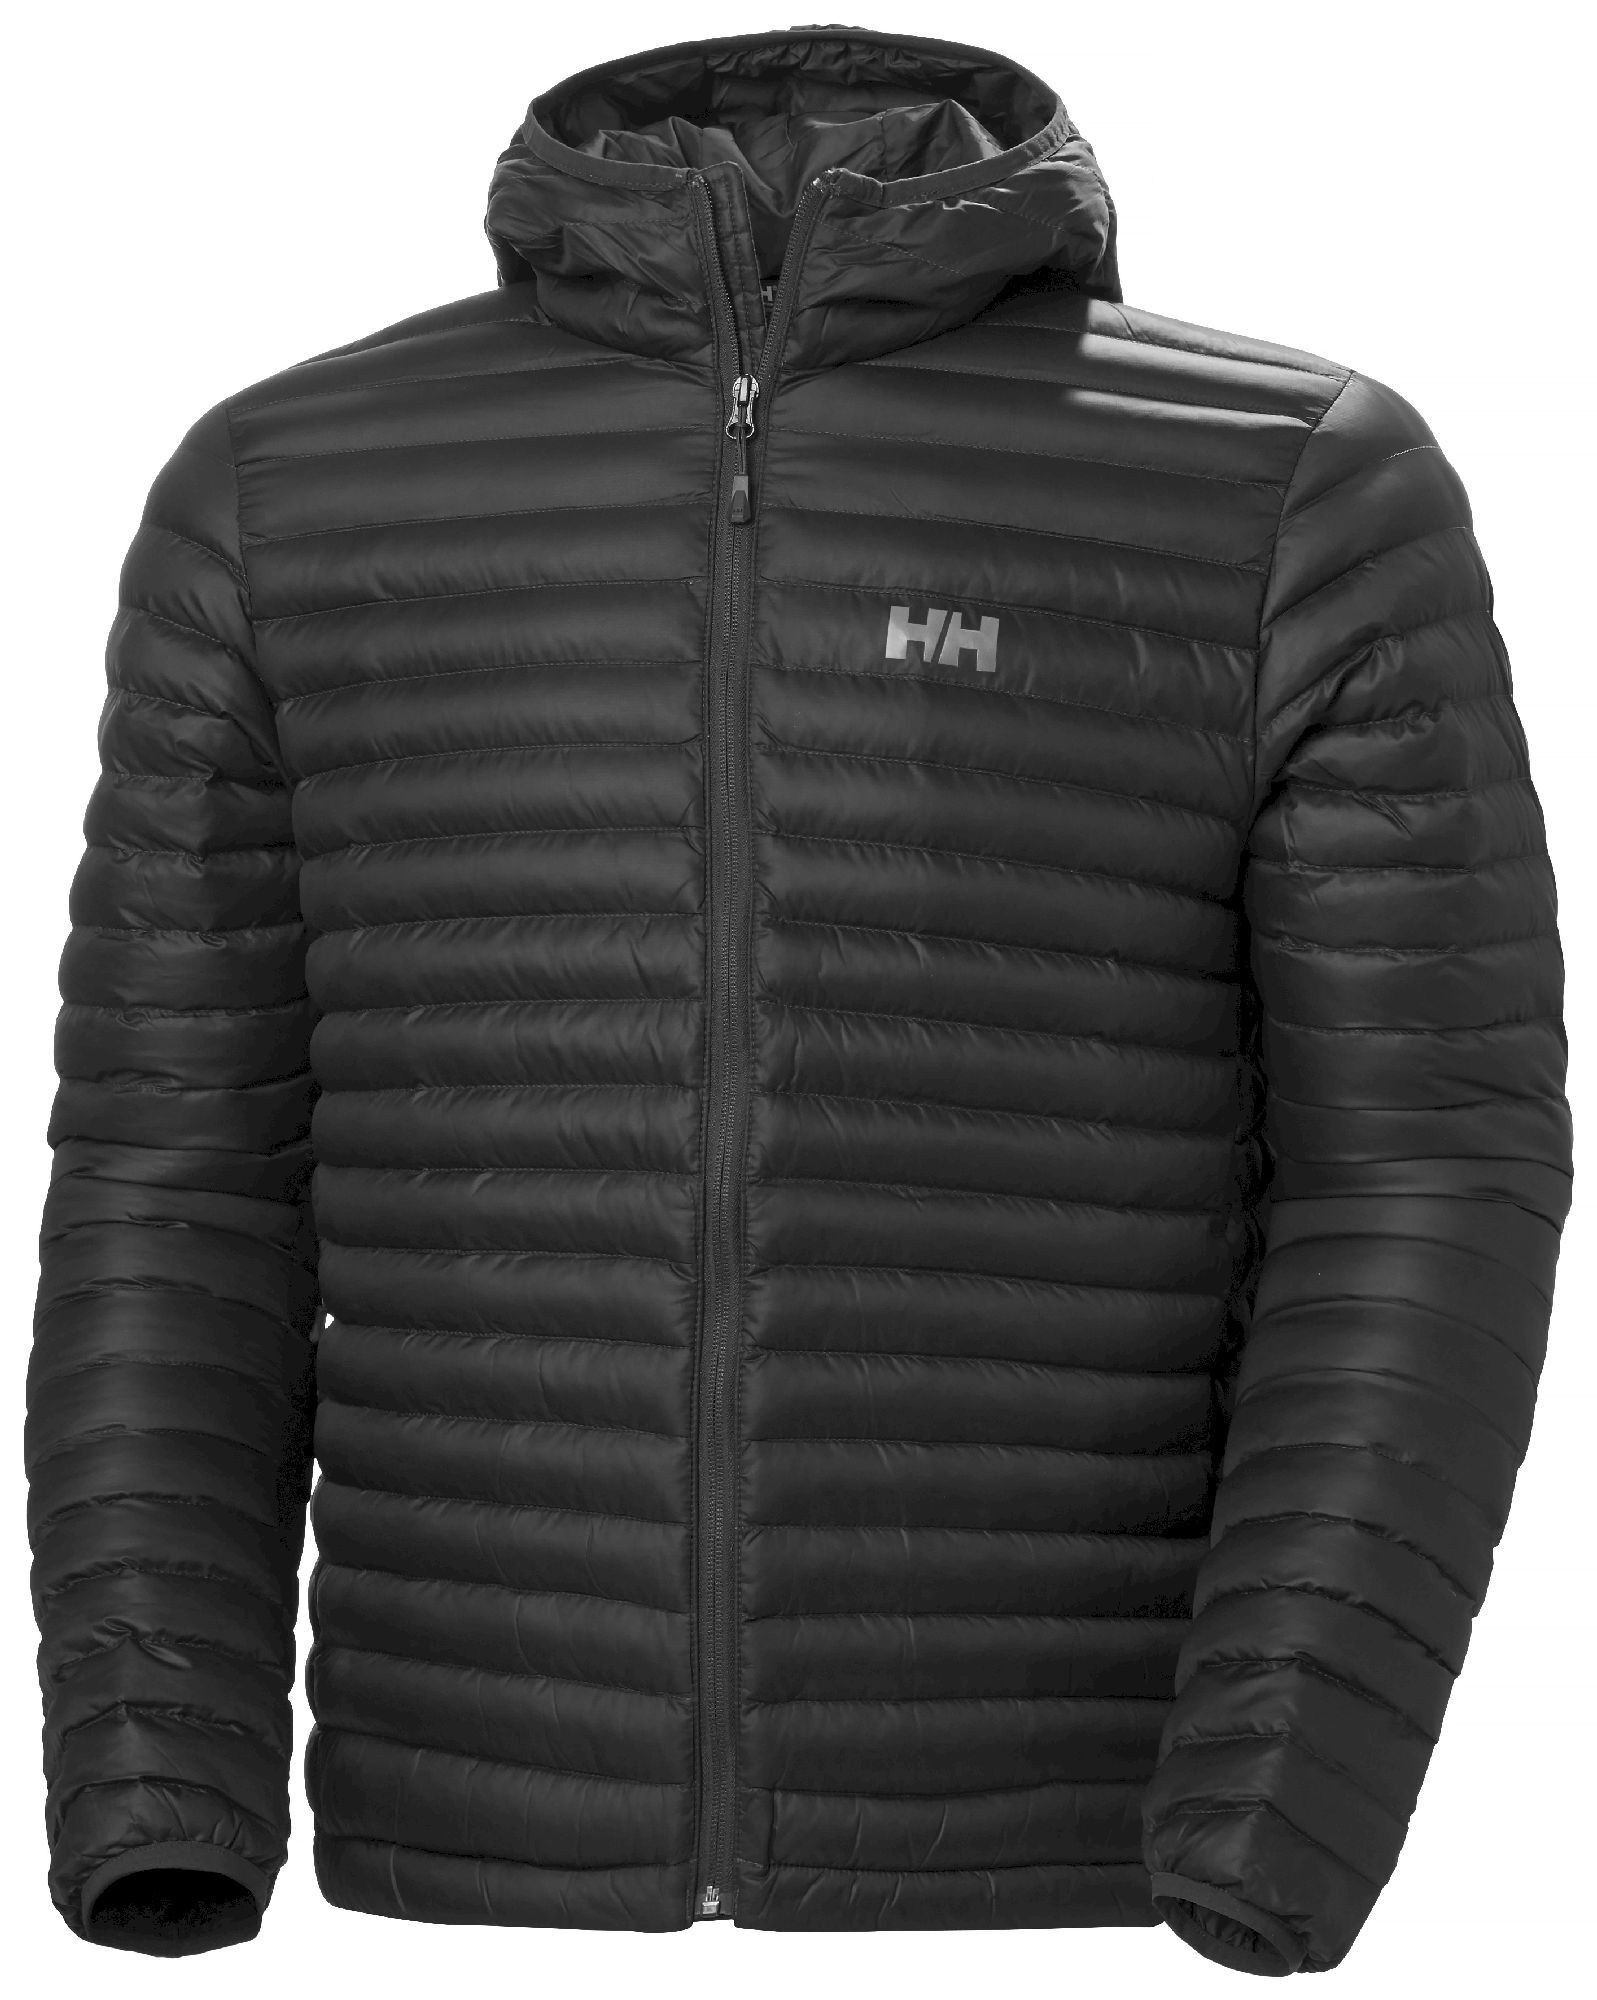 Helly Hansen Sirdal Hooded Insulated Jacket - Synthetic jacket - Men's | Hardloop